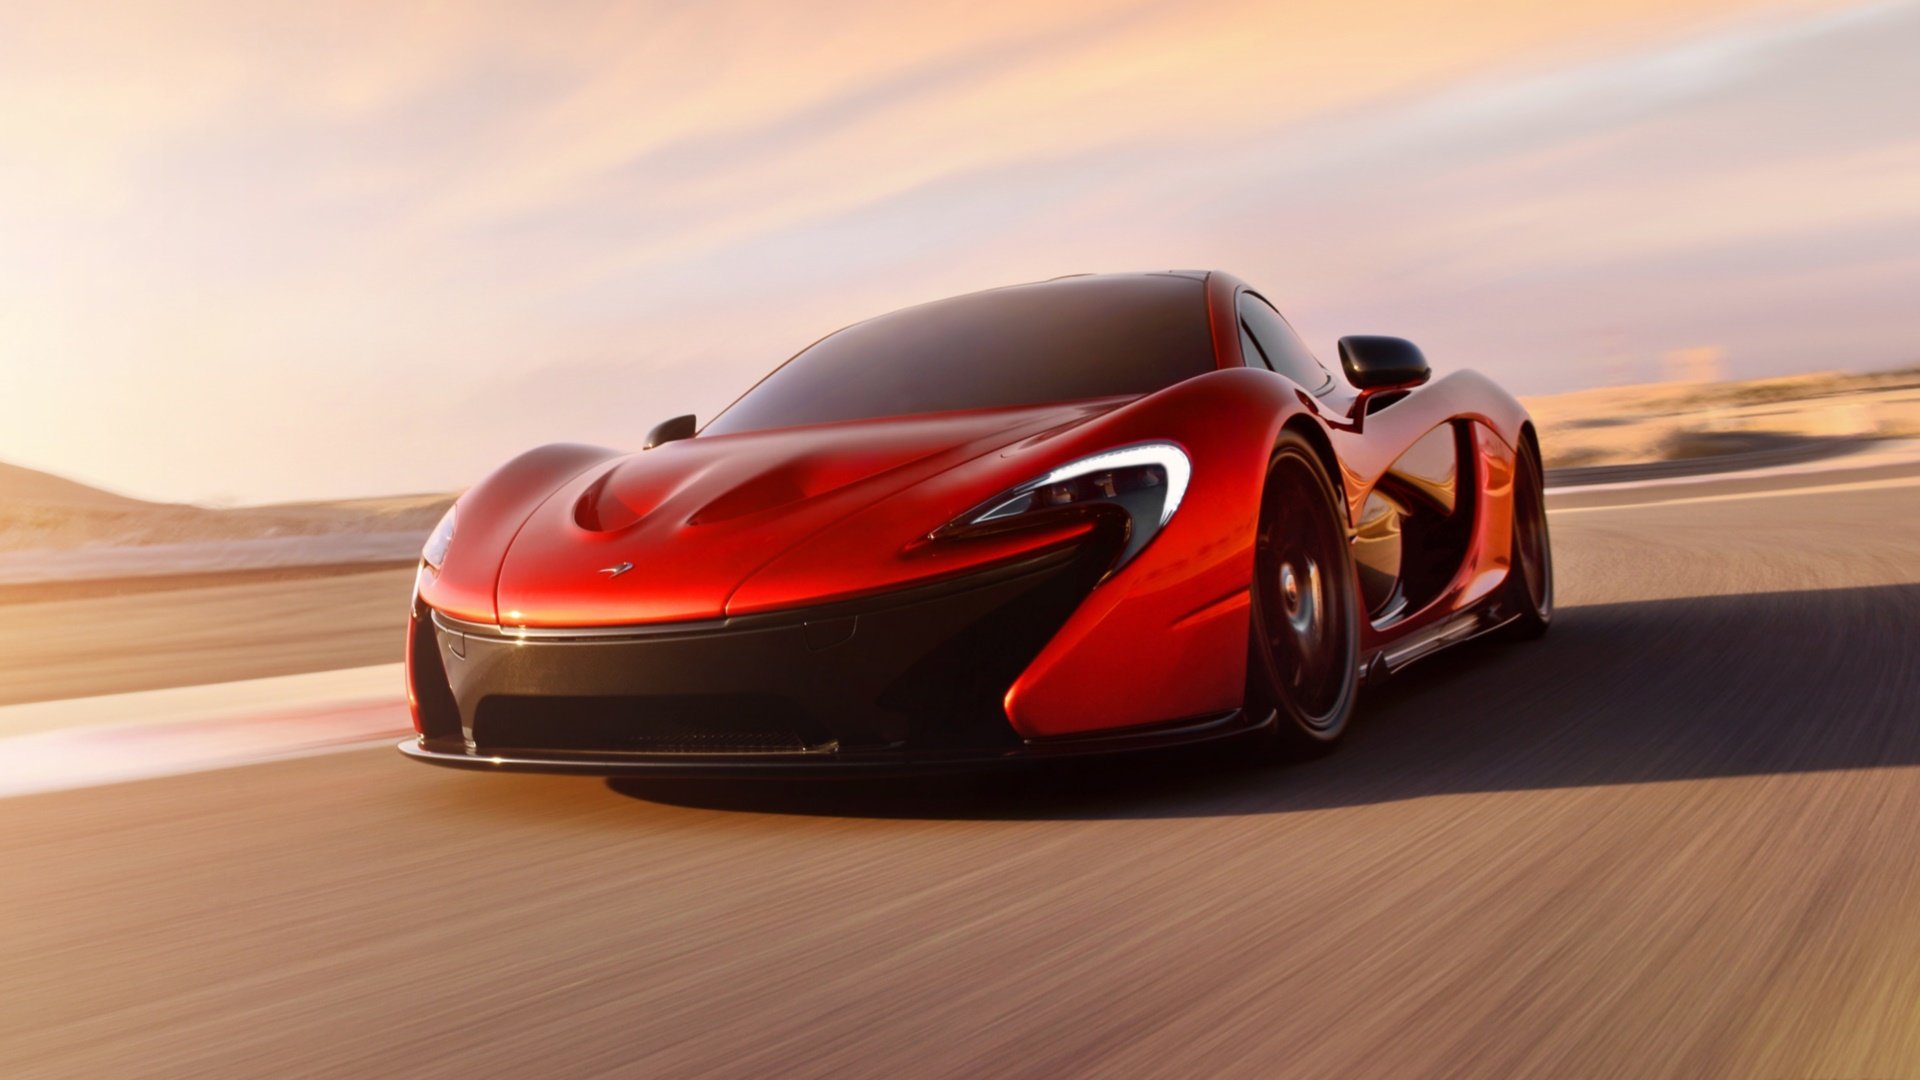 Awesome McLaren P1 free background ID:207548 for hd 1080p computer